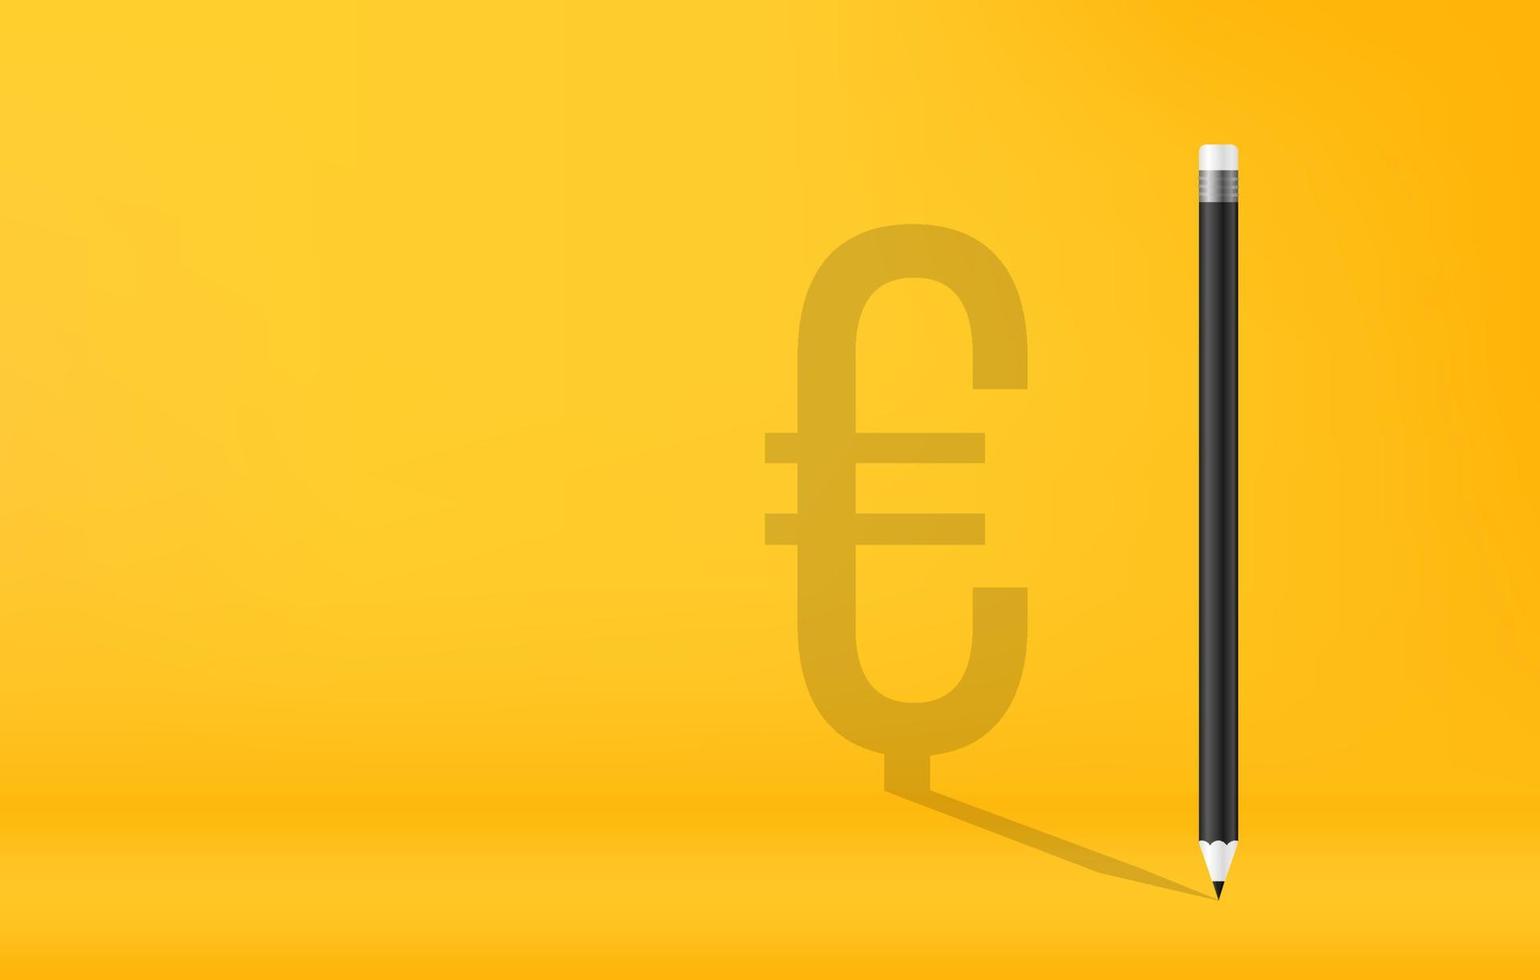 Pencils with euro currency symbol shadow on yellow background vector